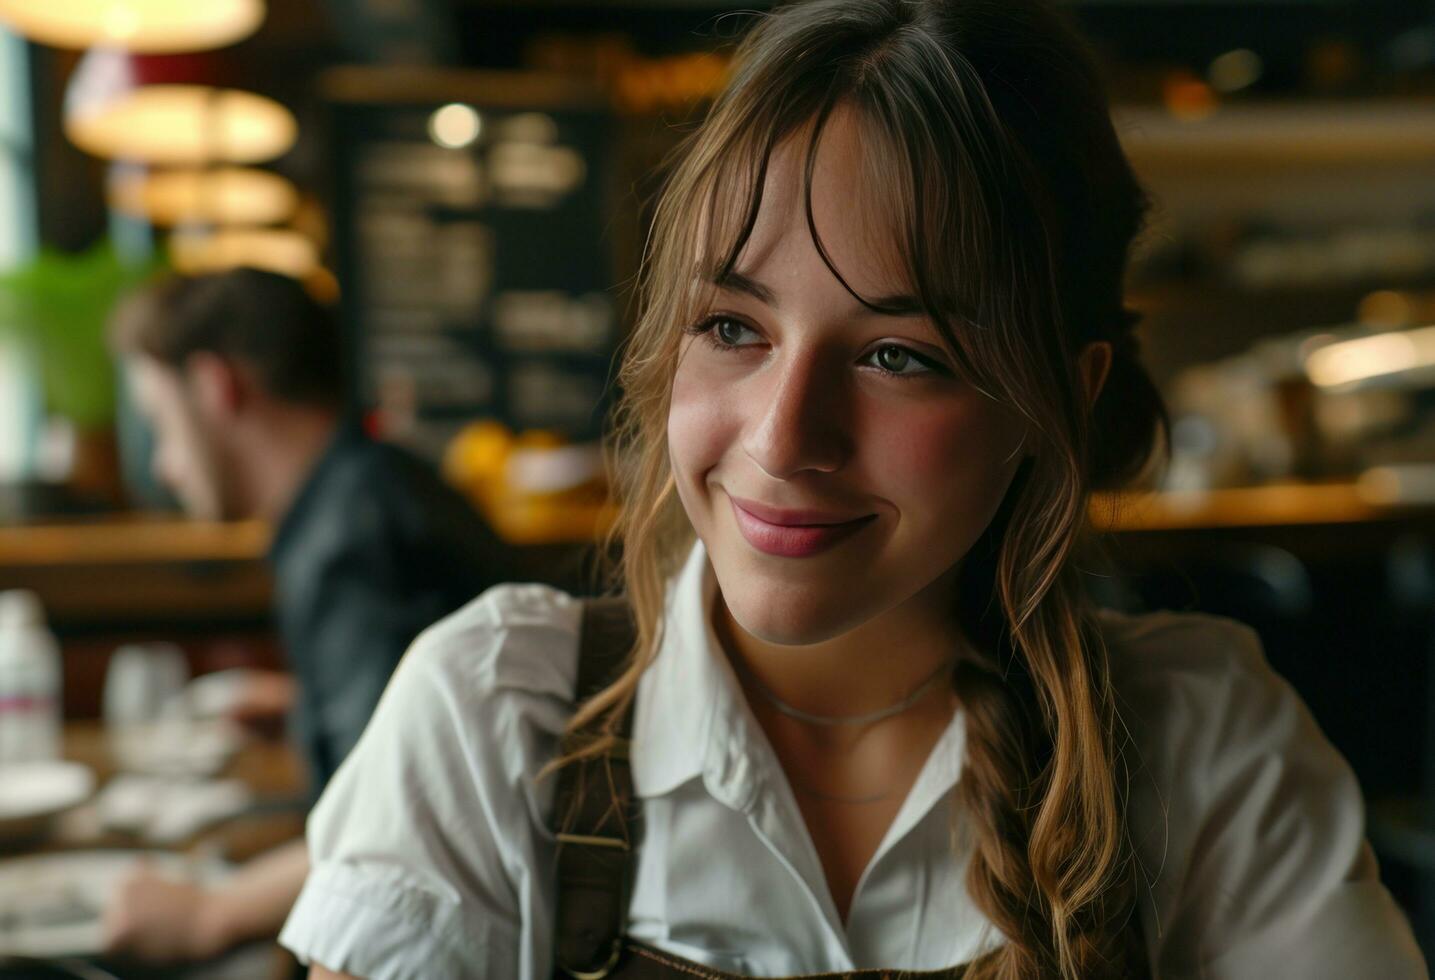 AI generated a young female waitress smiling at her customers in a cafe photo